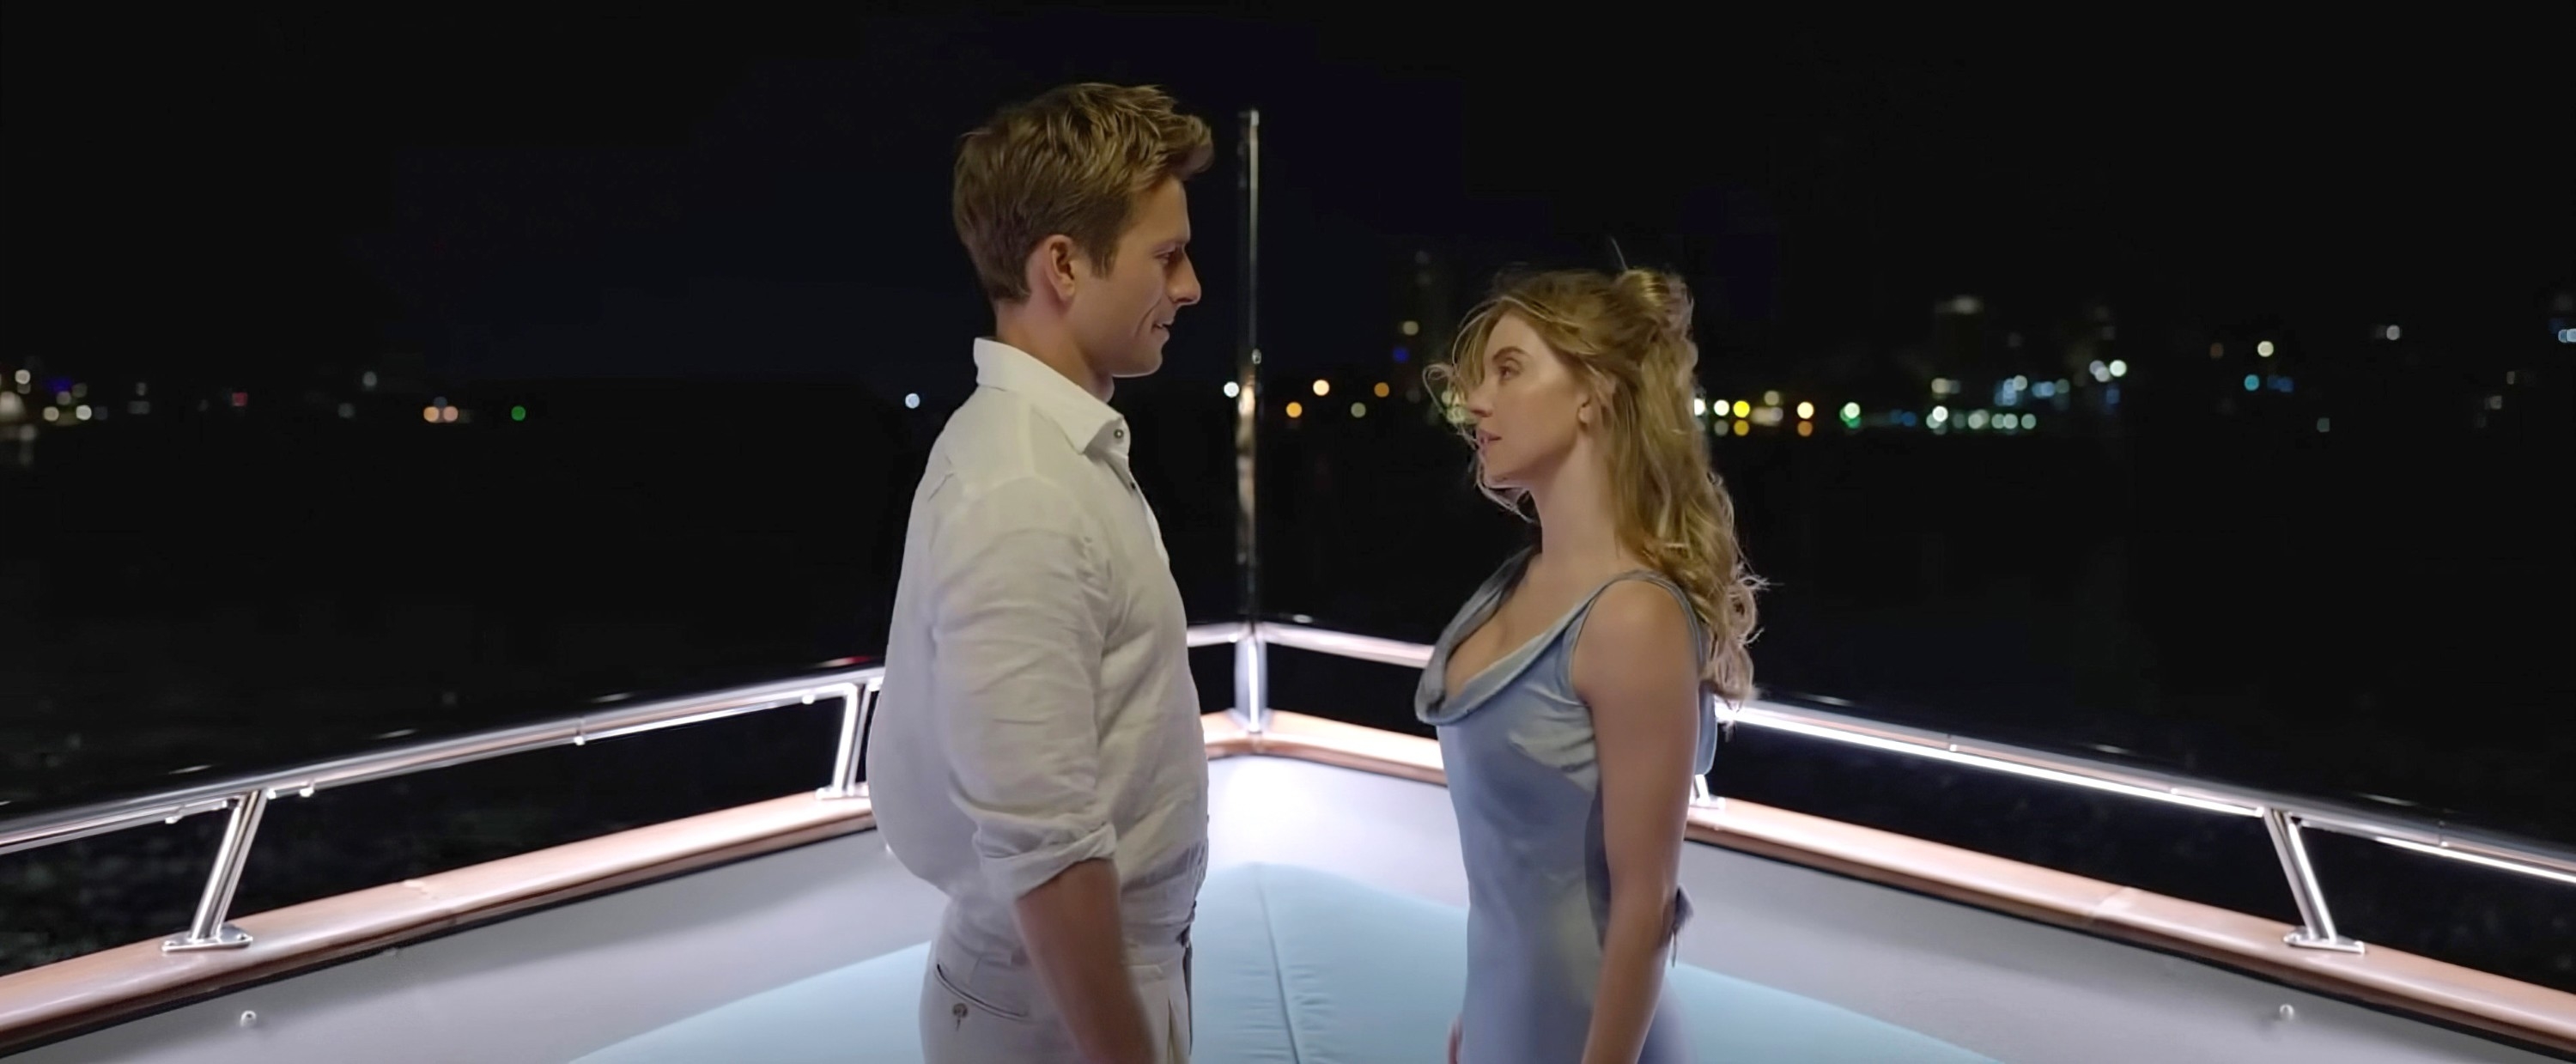 Ben and Bea stand facing each other on a boat deck at night